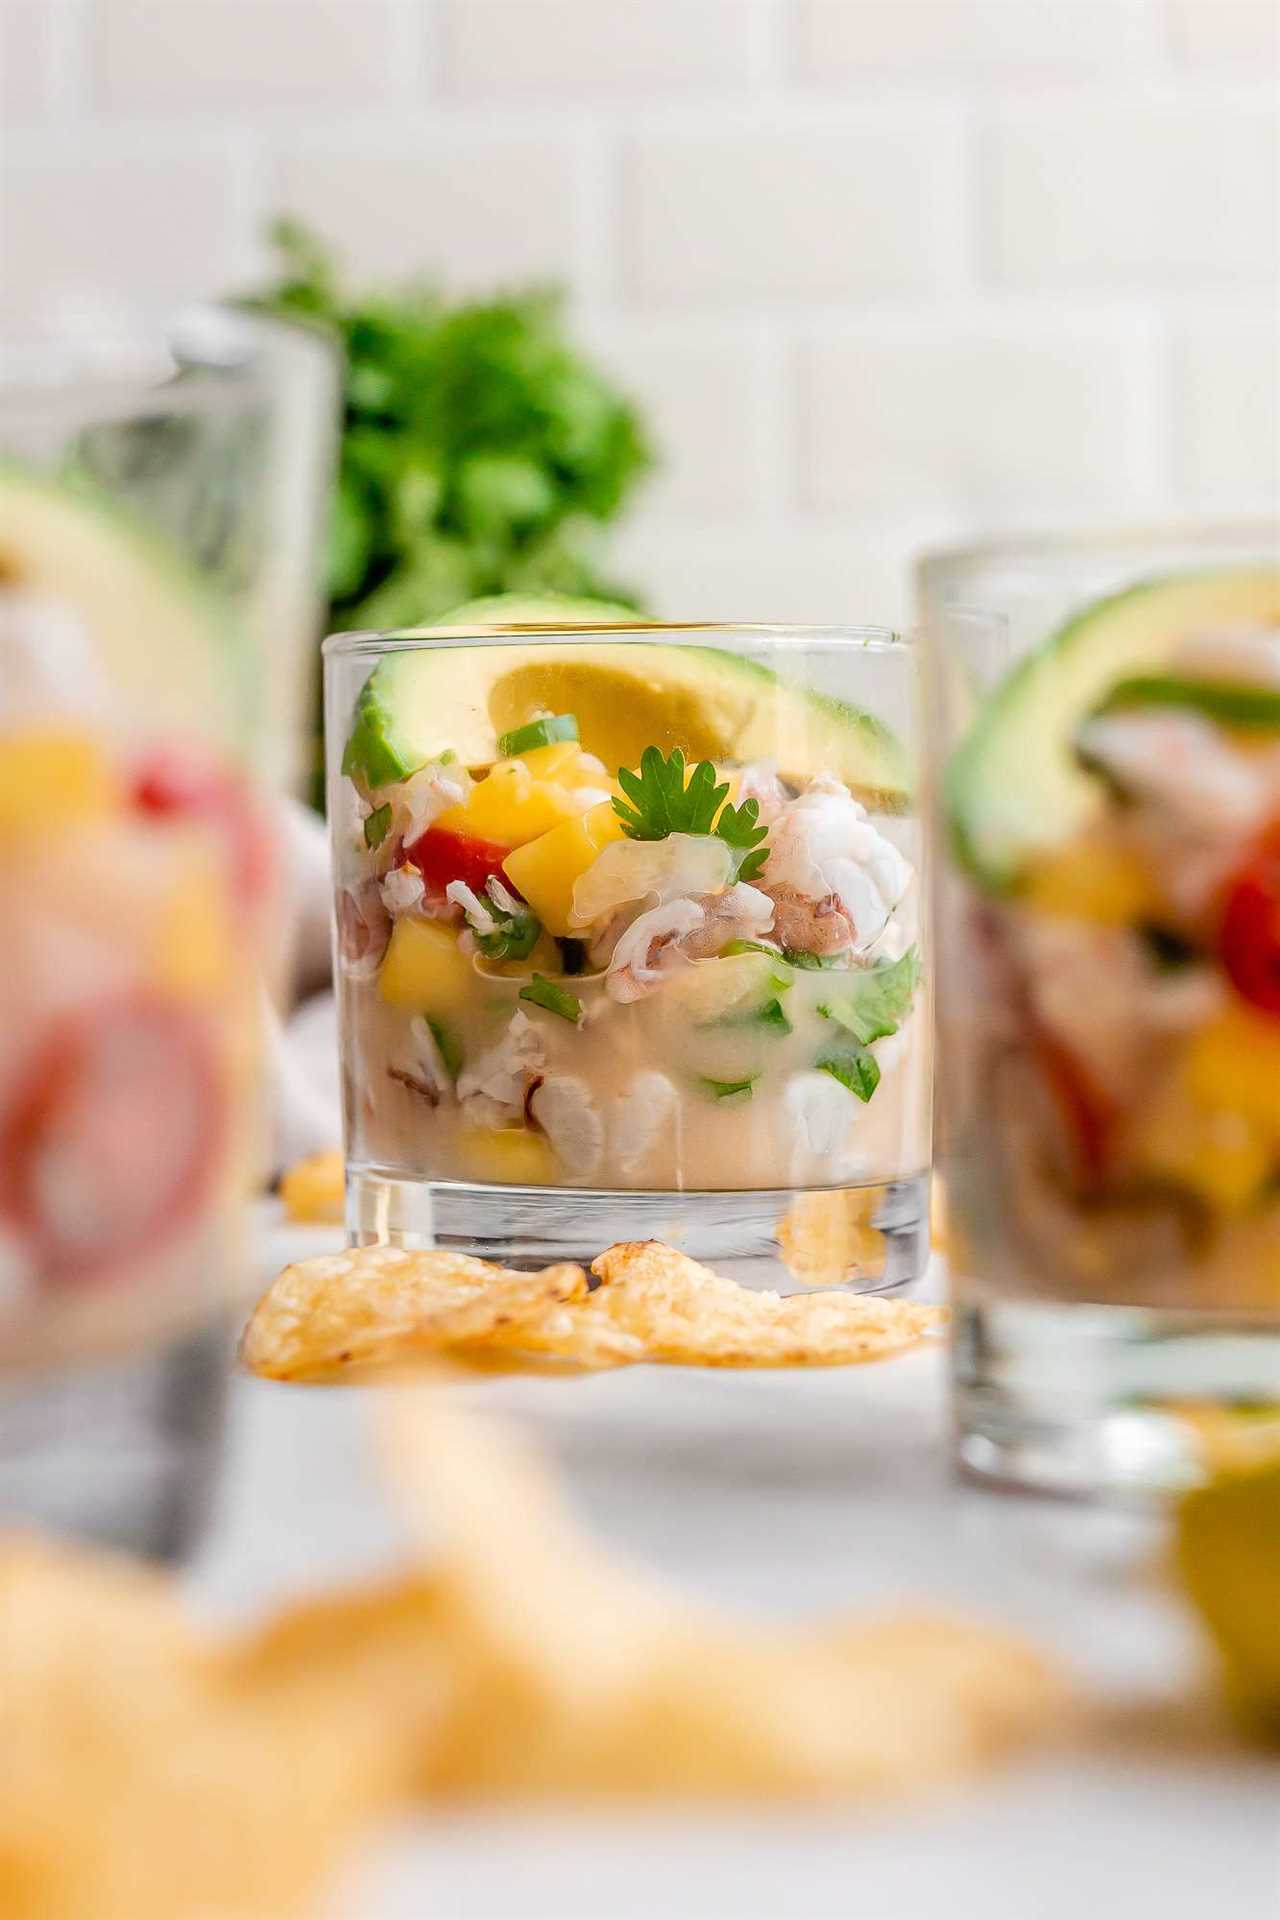 shrimp ceviche with yellow mangos, green cilantro, red tomatoes, and lime juice served in a clear bourbon glass with potato chips on the side